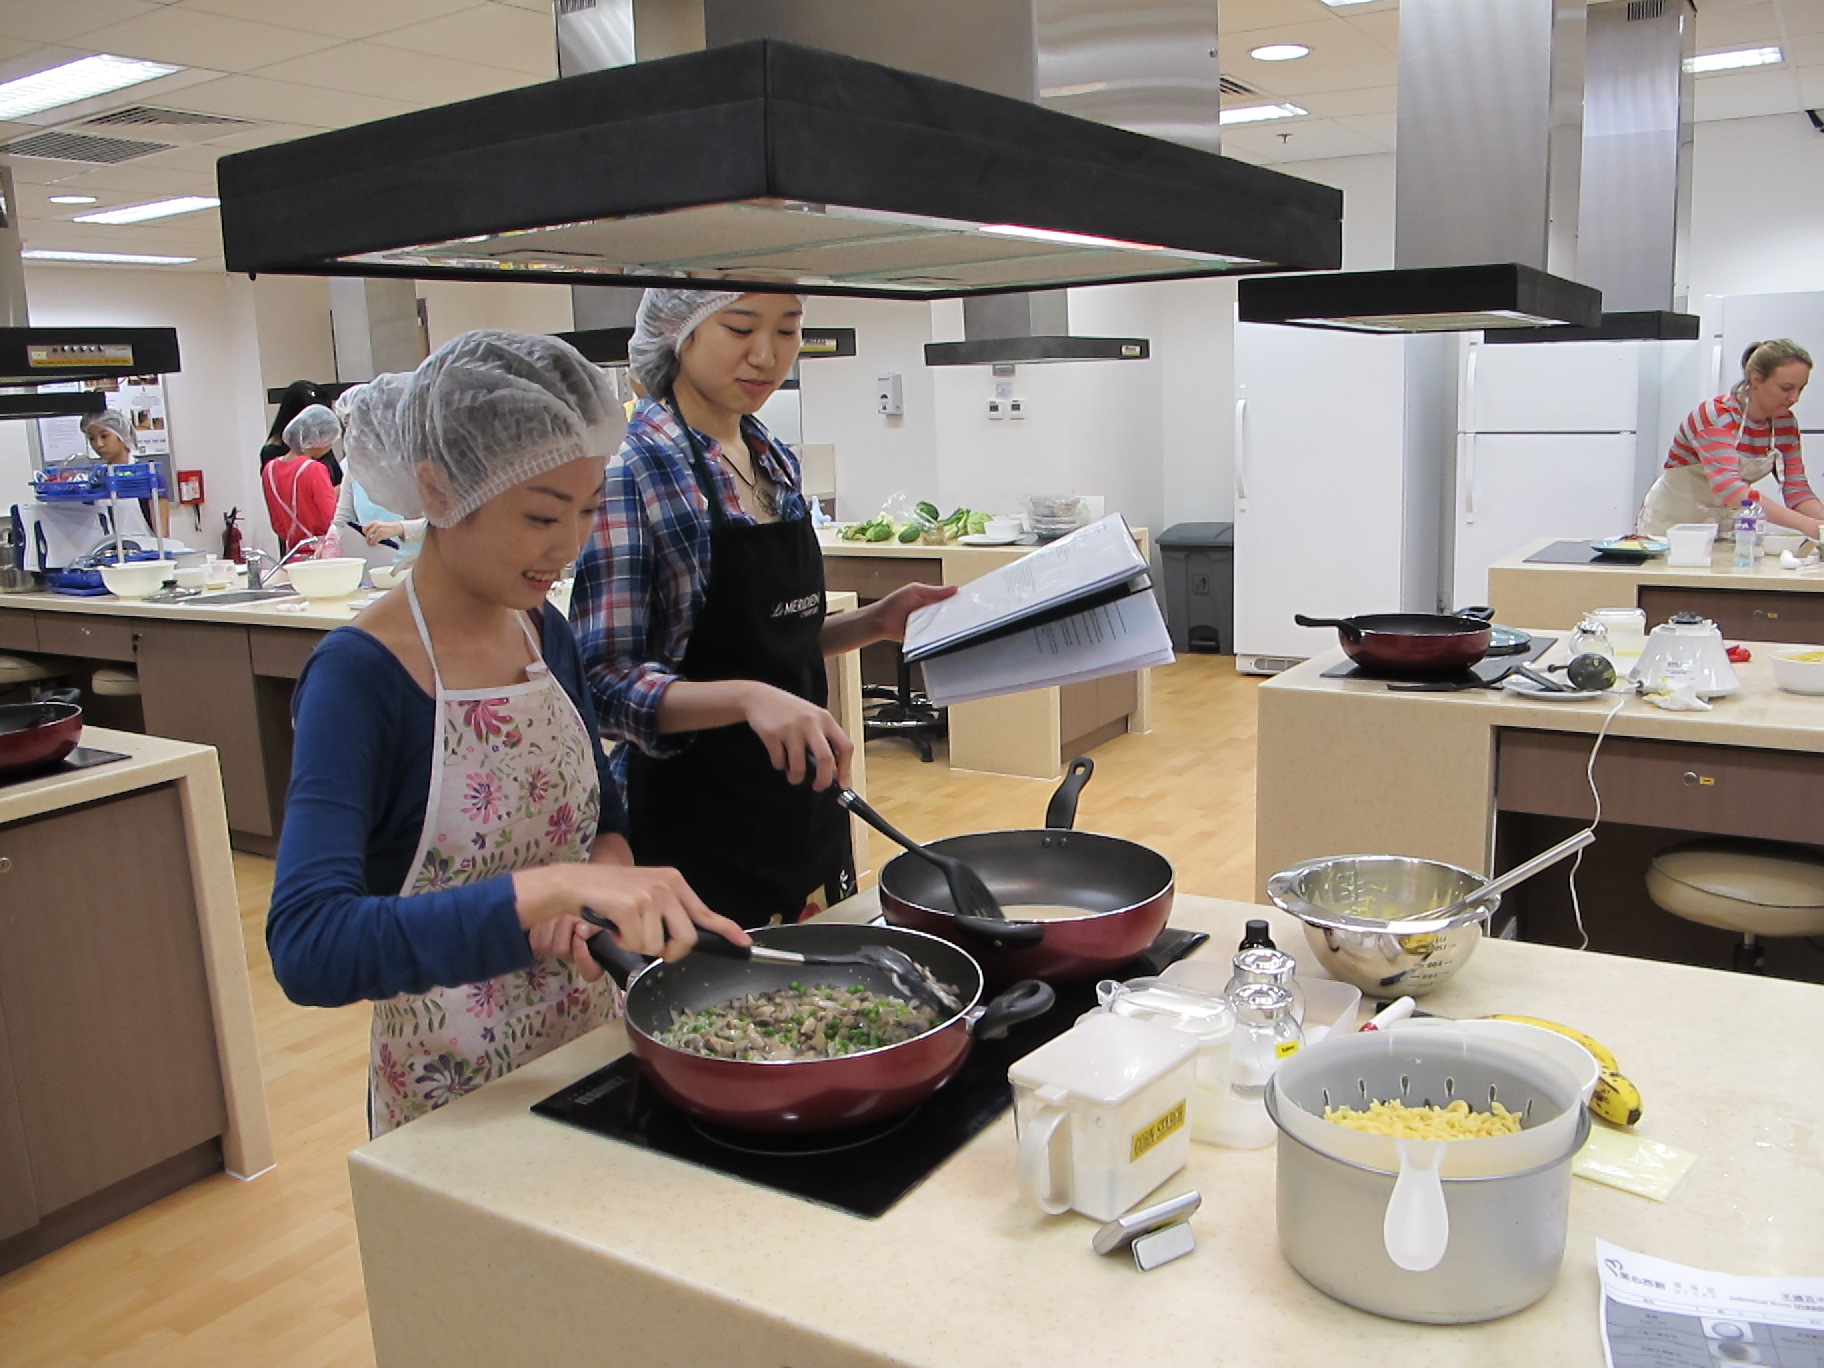 Feeding Hong Kong – Prepare nutritious, simple and low budget cookbook for the needy - Photo - 69